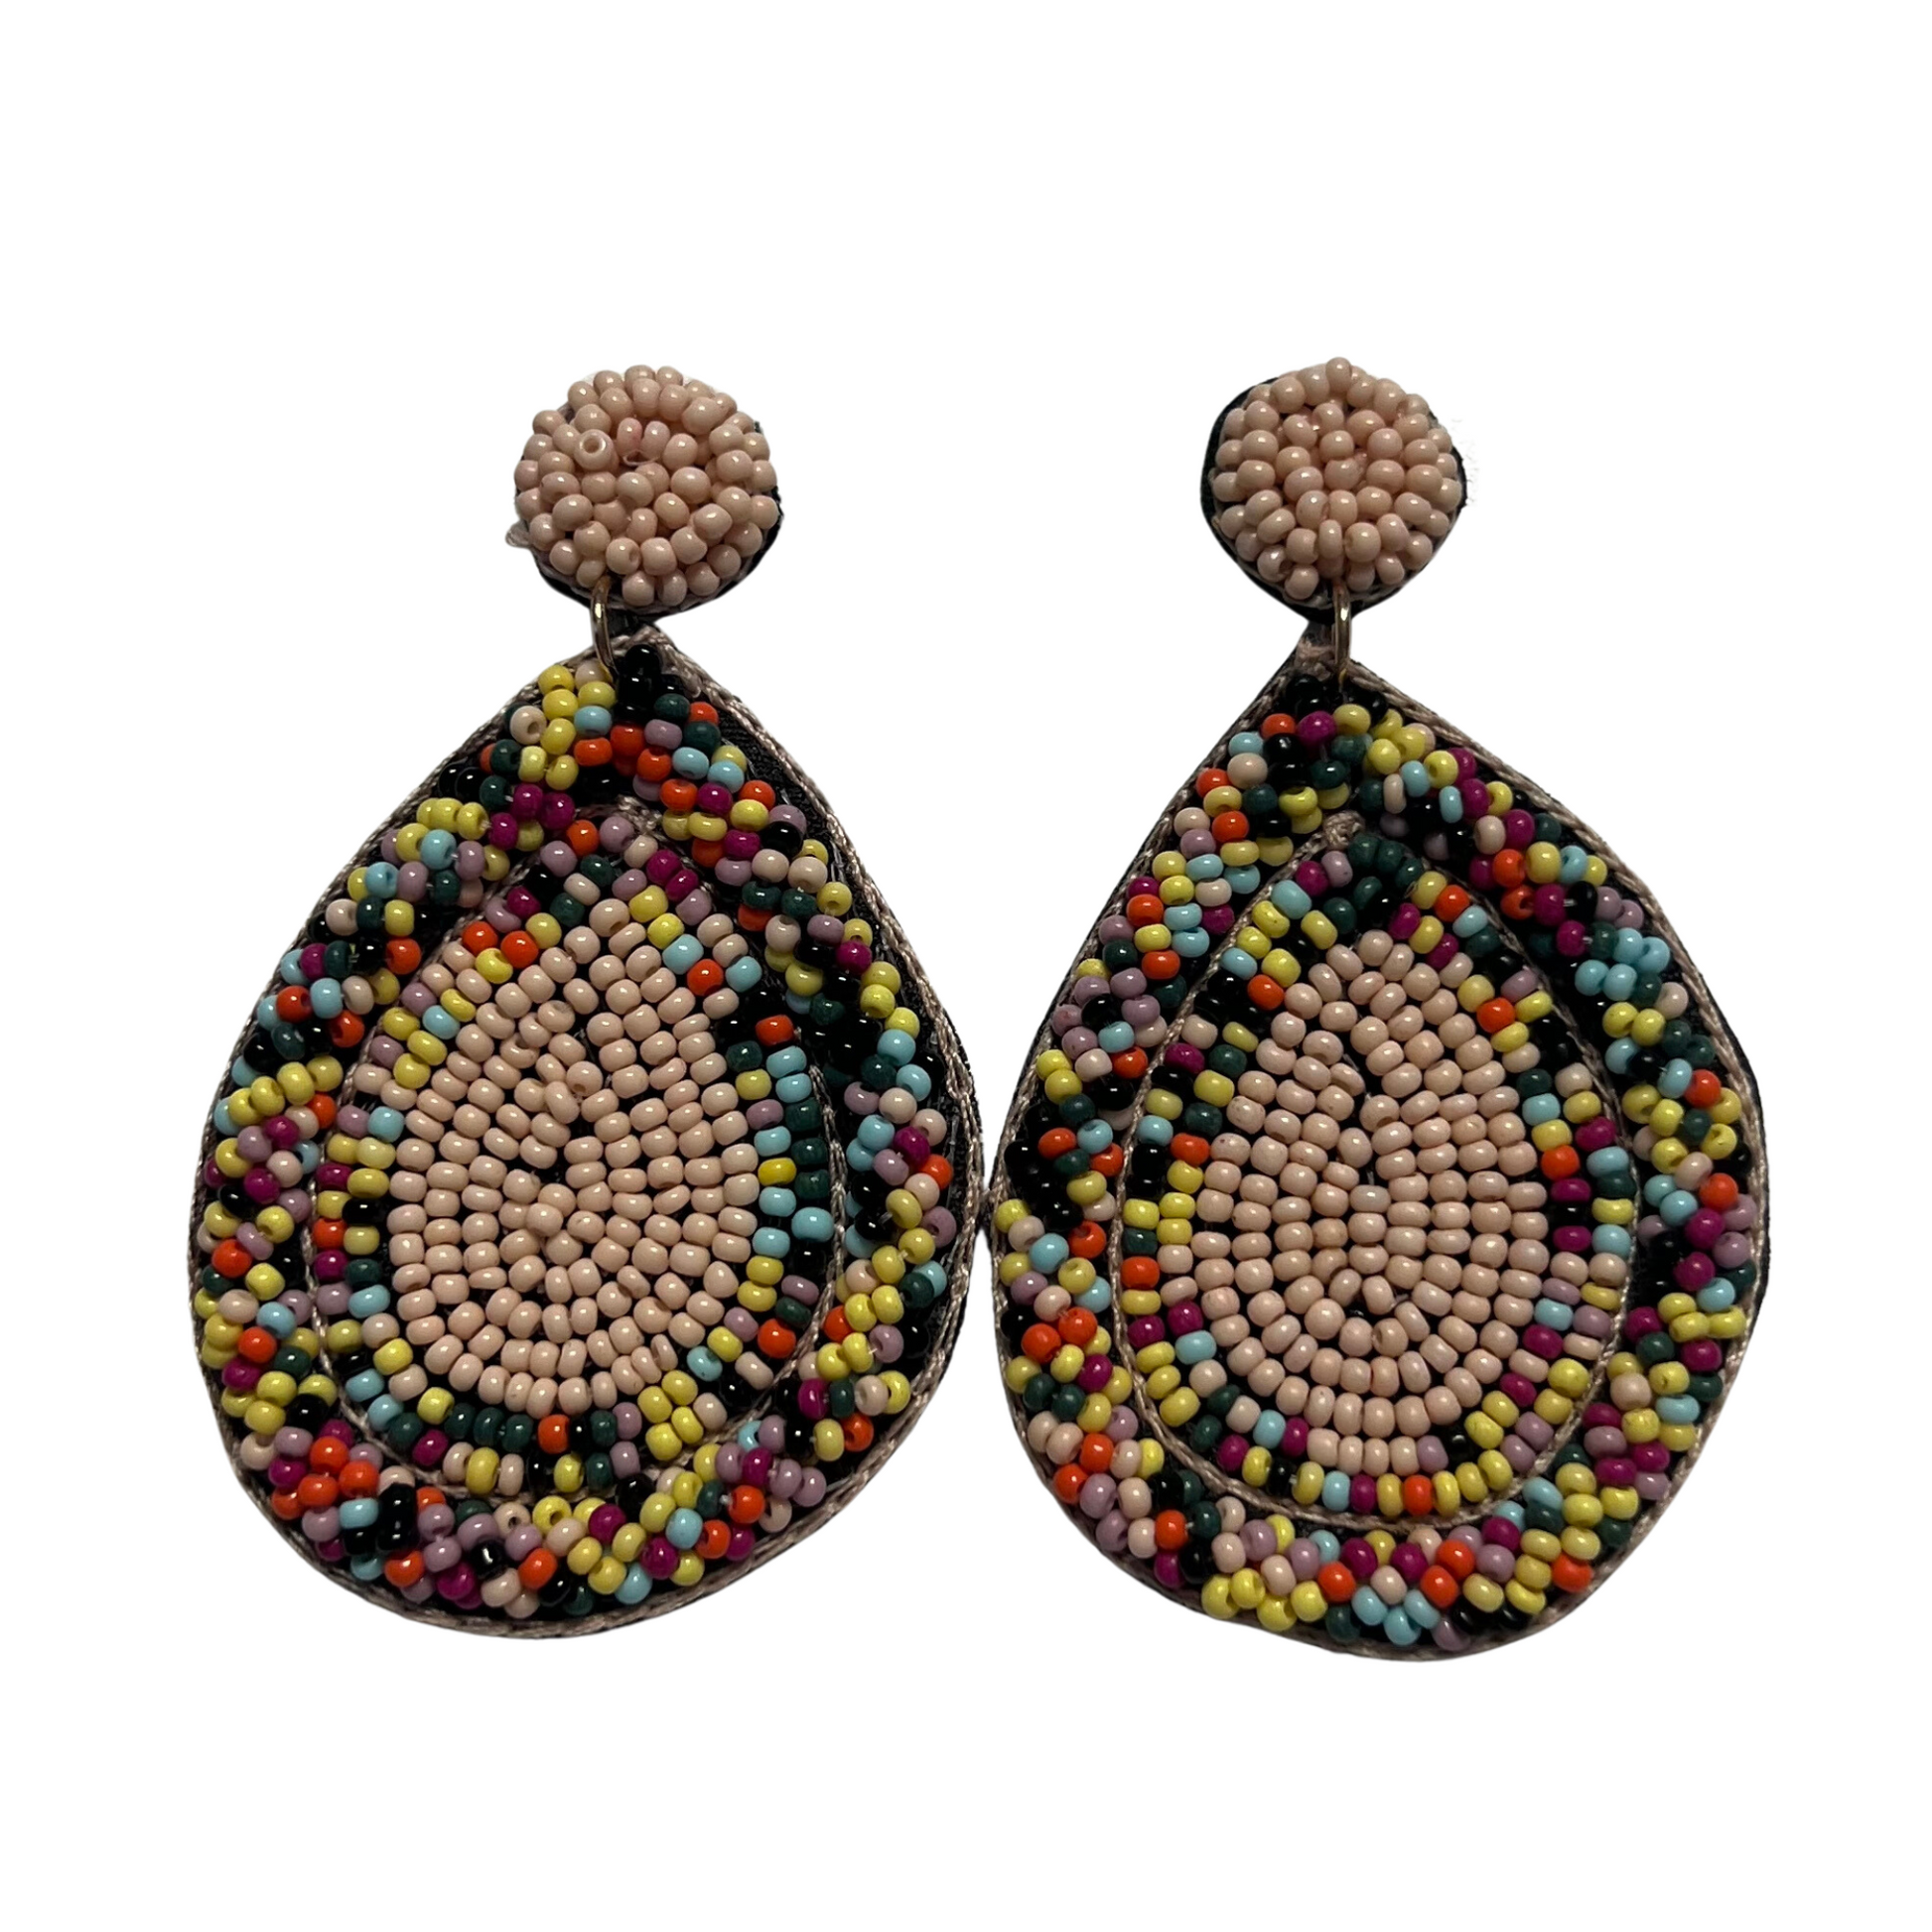 These beautiful beaded teardrop earrings are the perfect accessory to complete any look. The bright, multicolored beads will add a touch of color to any ensemble. The classic teardrop shape lends a stunning silhouette, while easily attaching with the drop earrings.